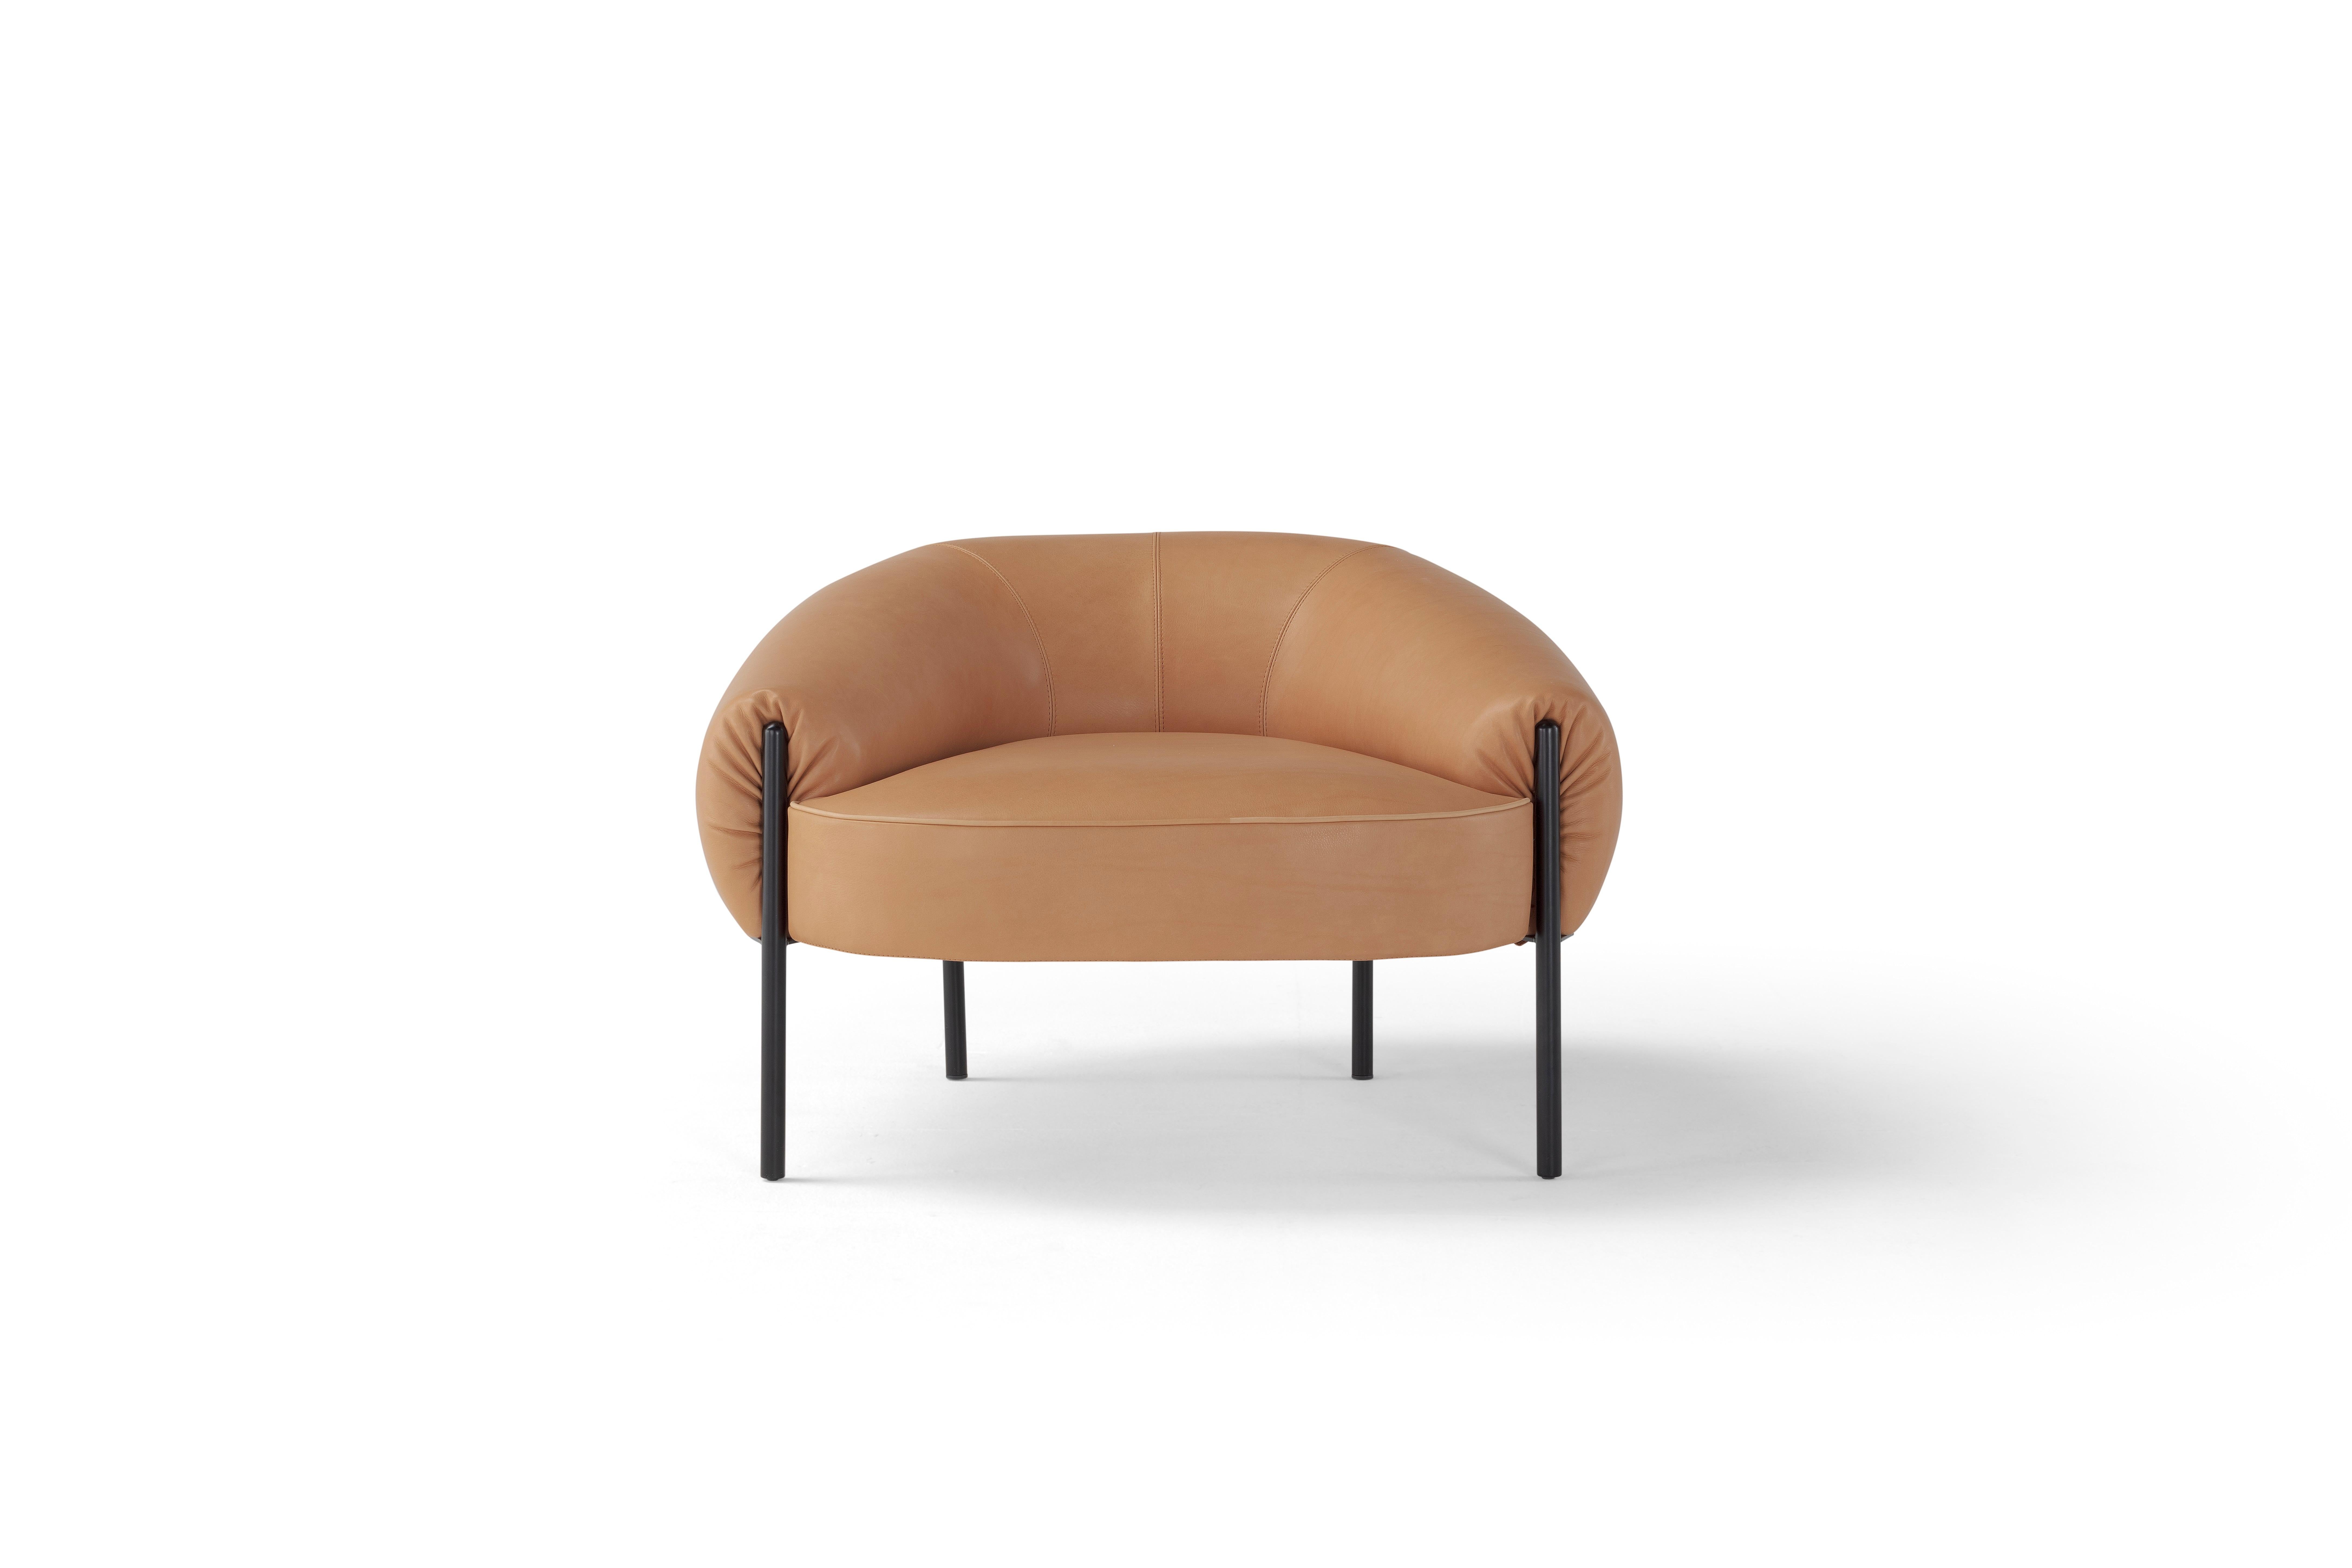 Contemporary Set 'Isola' by Amura Lab, Armchair + Ottoman, Leather Daino 01 For Sale 3